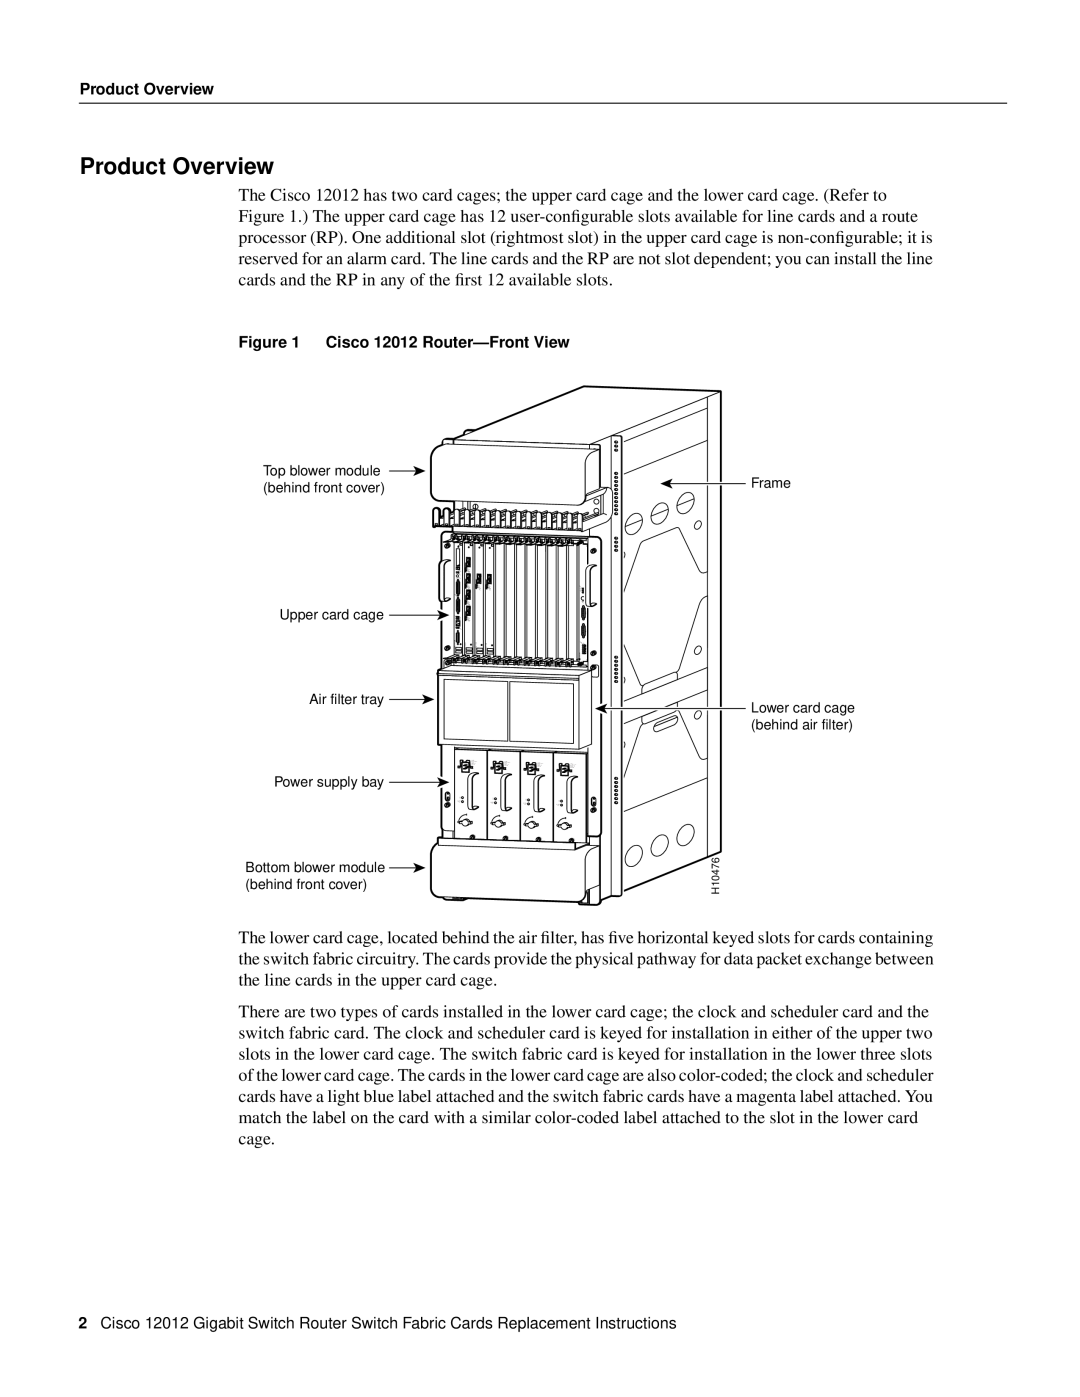 Cisco Systems GSR12-CSC=, GSR12-SFC= manual Product Overview, Cisco 12012 Router-Front View 